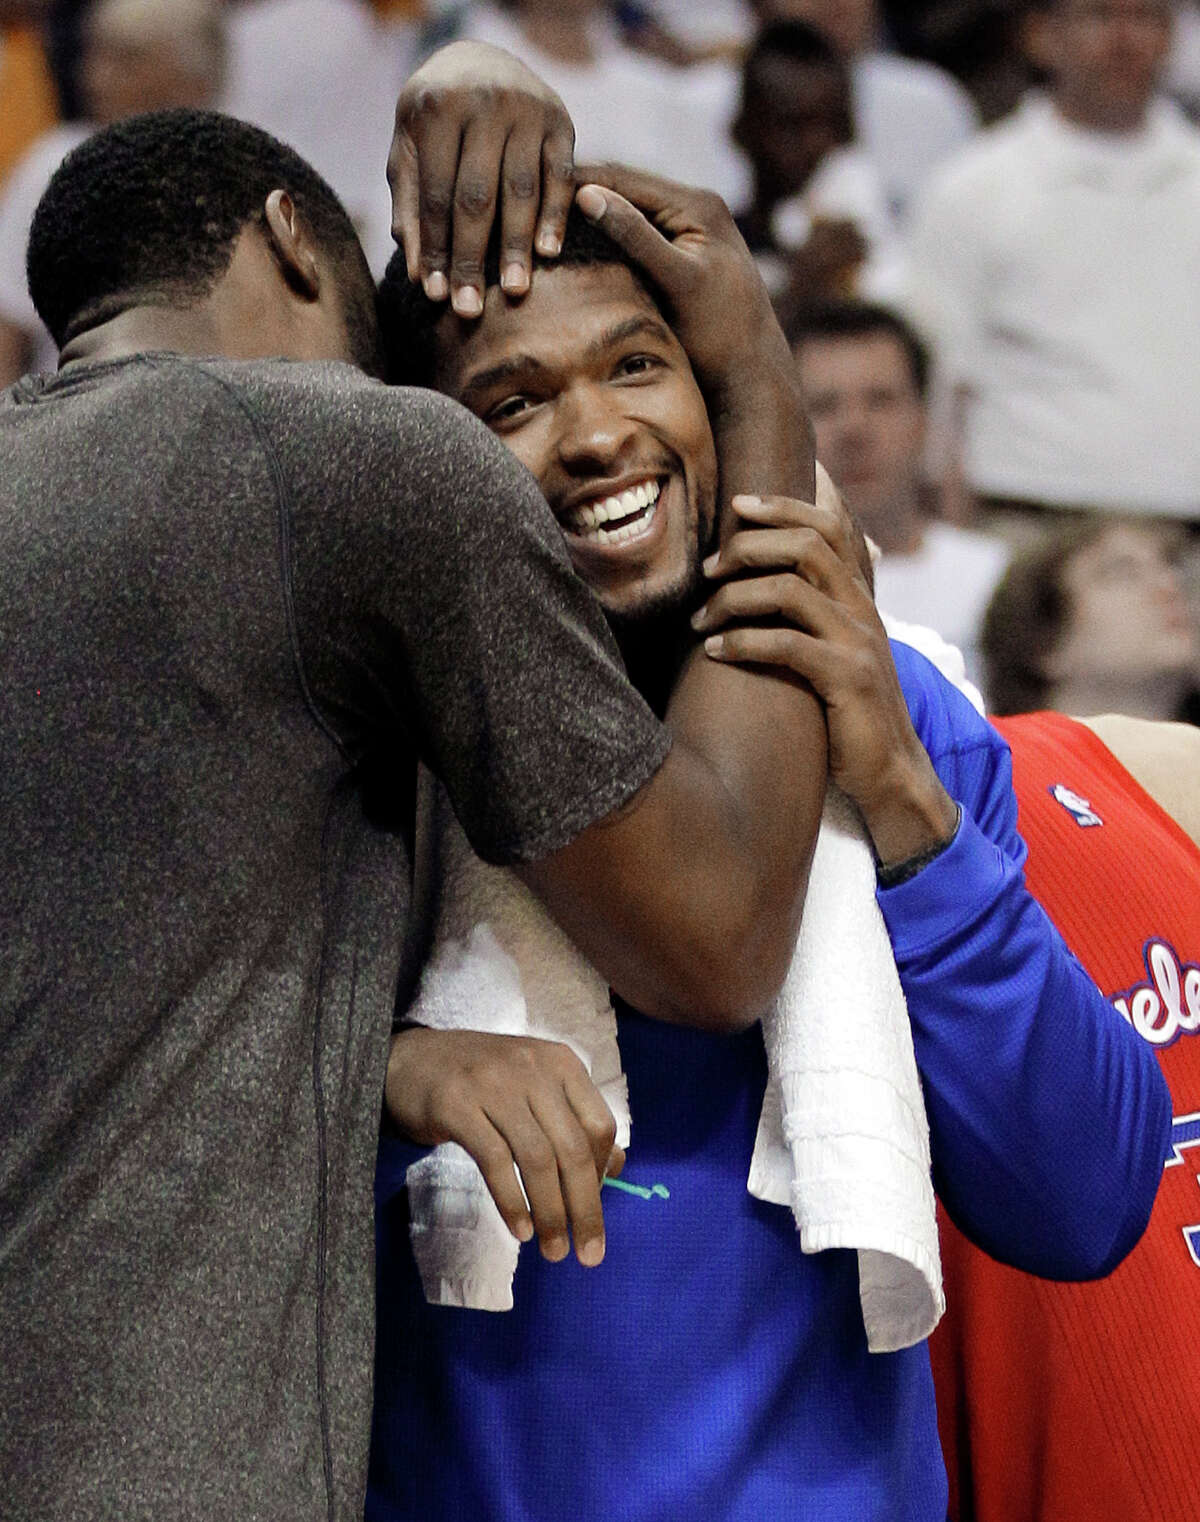 Los Angeles Clippers center DeAndre Jordan, left, hugs teammate Ryan Gomes, right, in final seconds of the second half of Game 7 against the Memphis Grizzlies in a first-round NBA basketball playoff series on Sunday, May 13, 2012, in Memphis, Tenn. The Clippers won 82-72 to take the series 4-3. (AP Photo/Mark Humphrey)